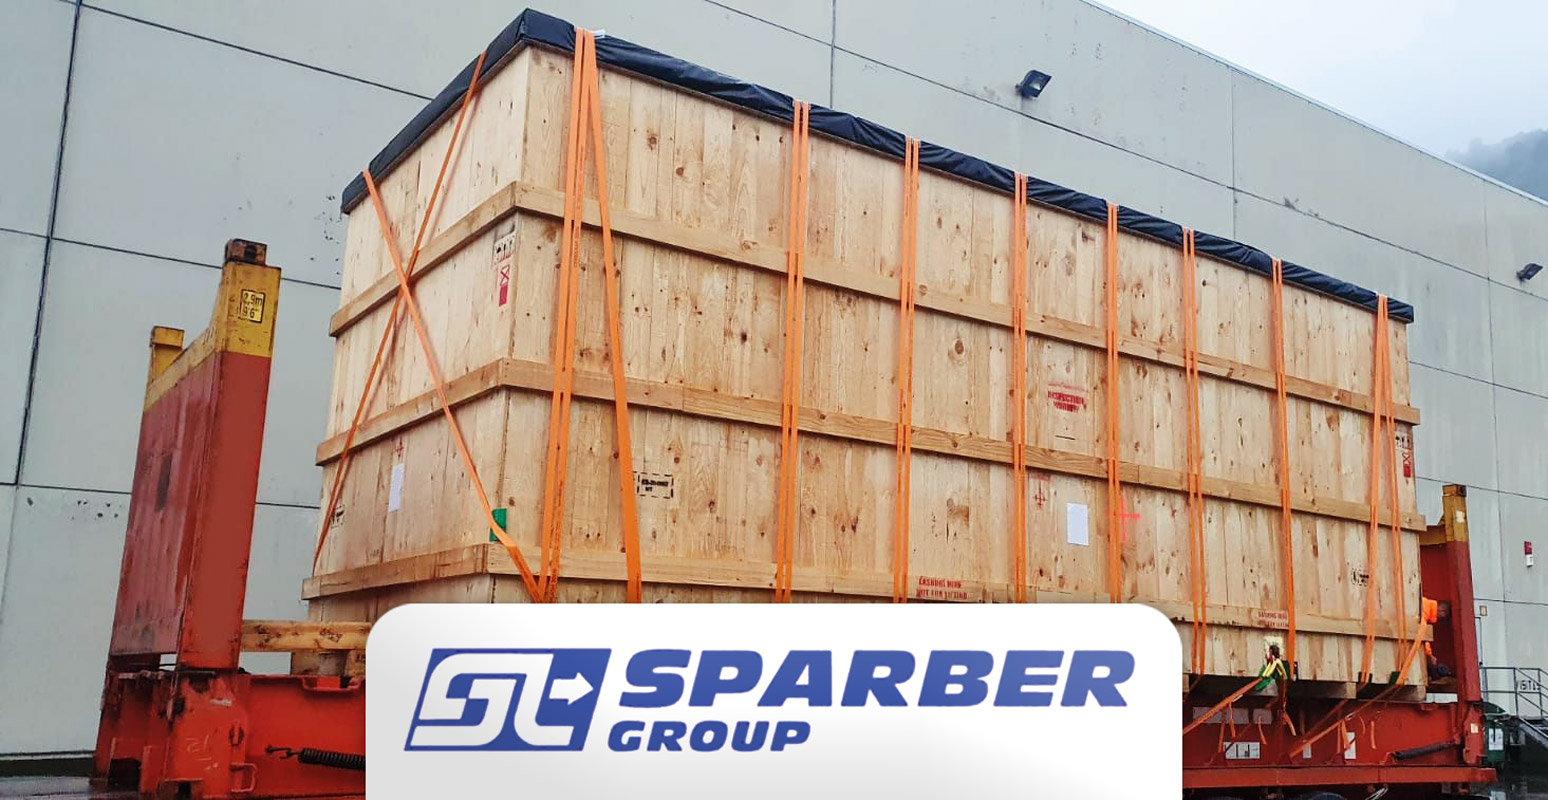 Sparber Shipped a 125mt Crate from Spain to Canada